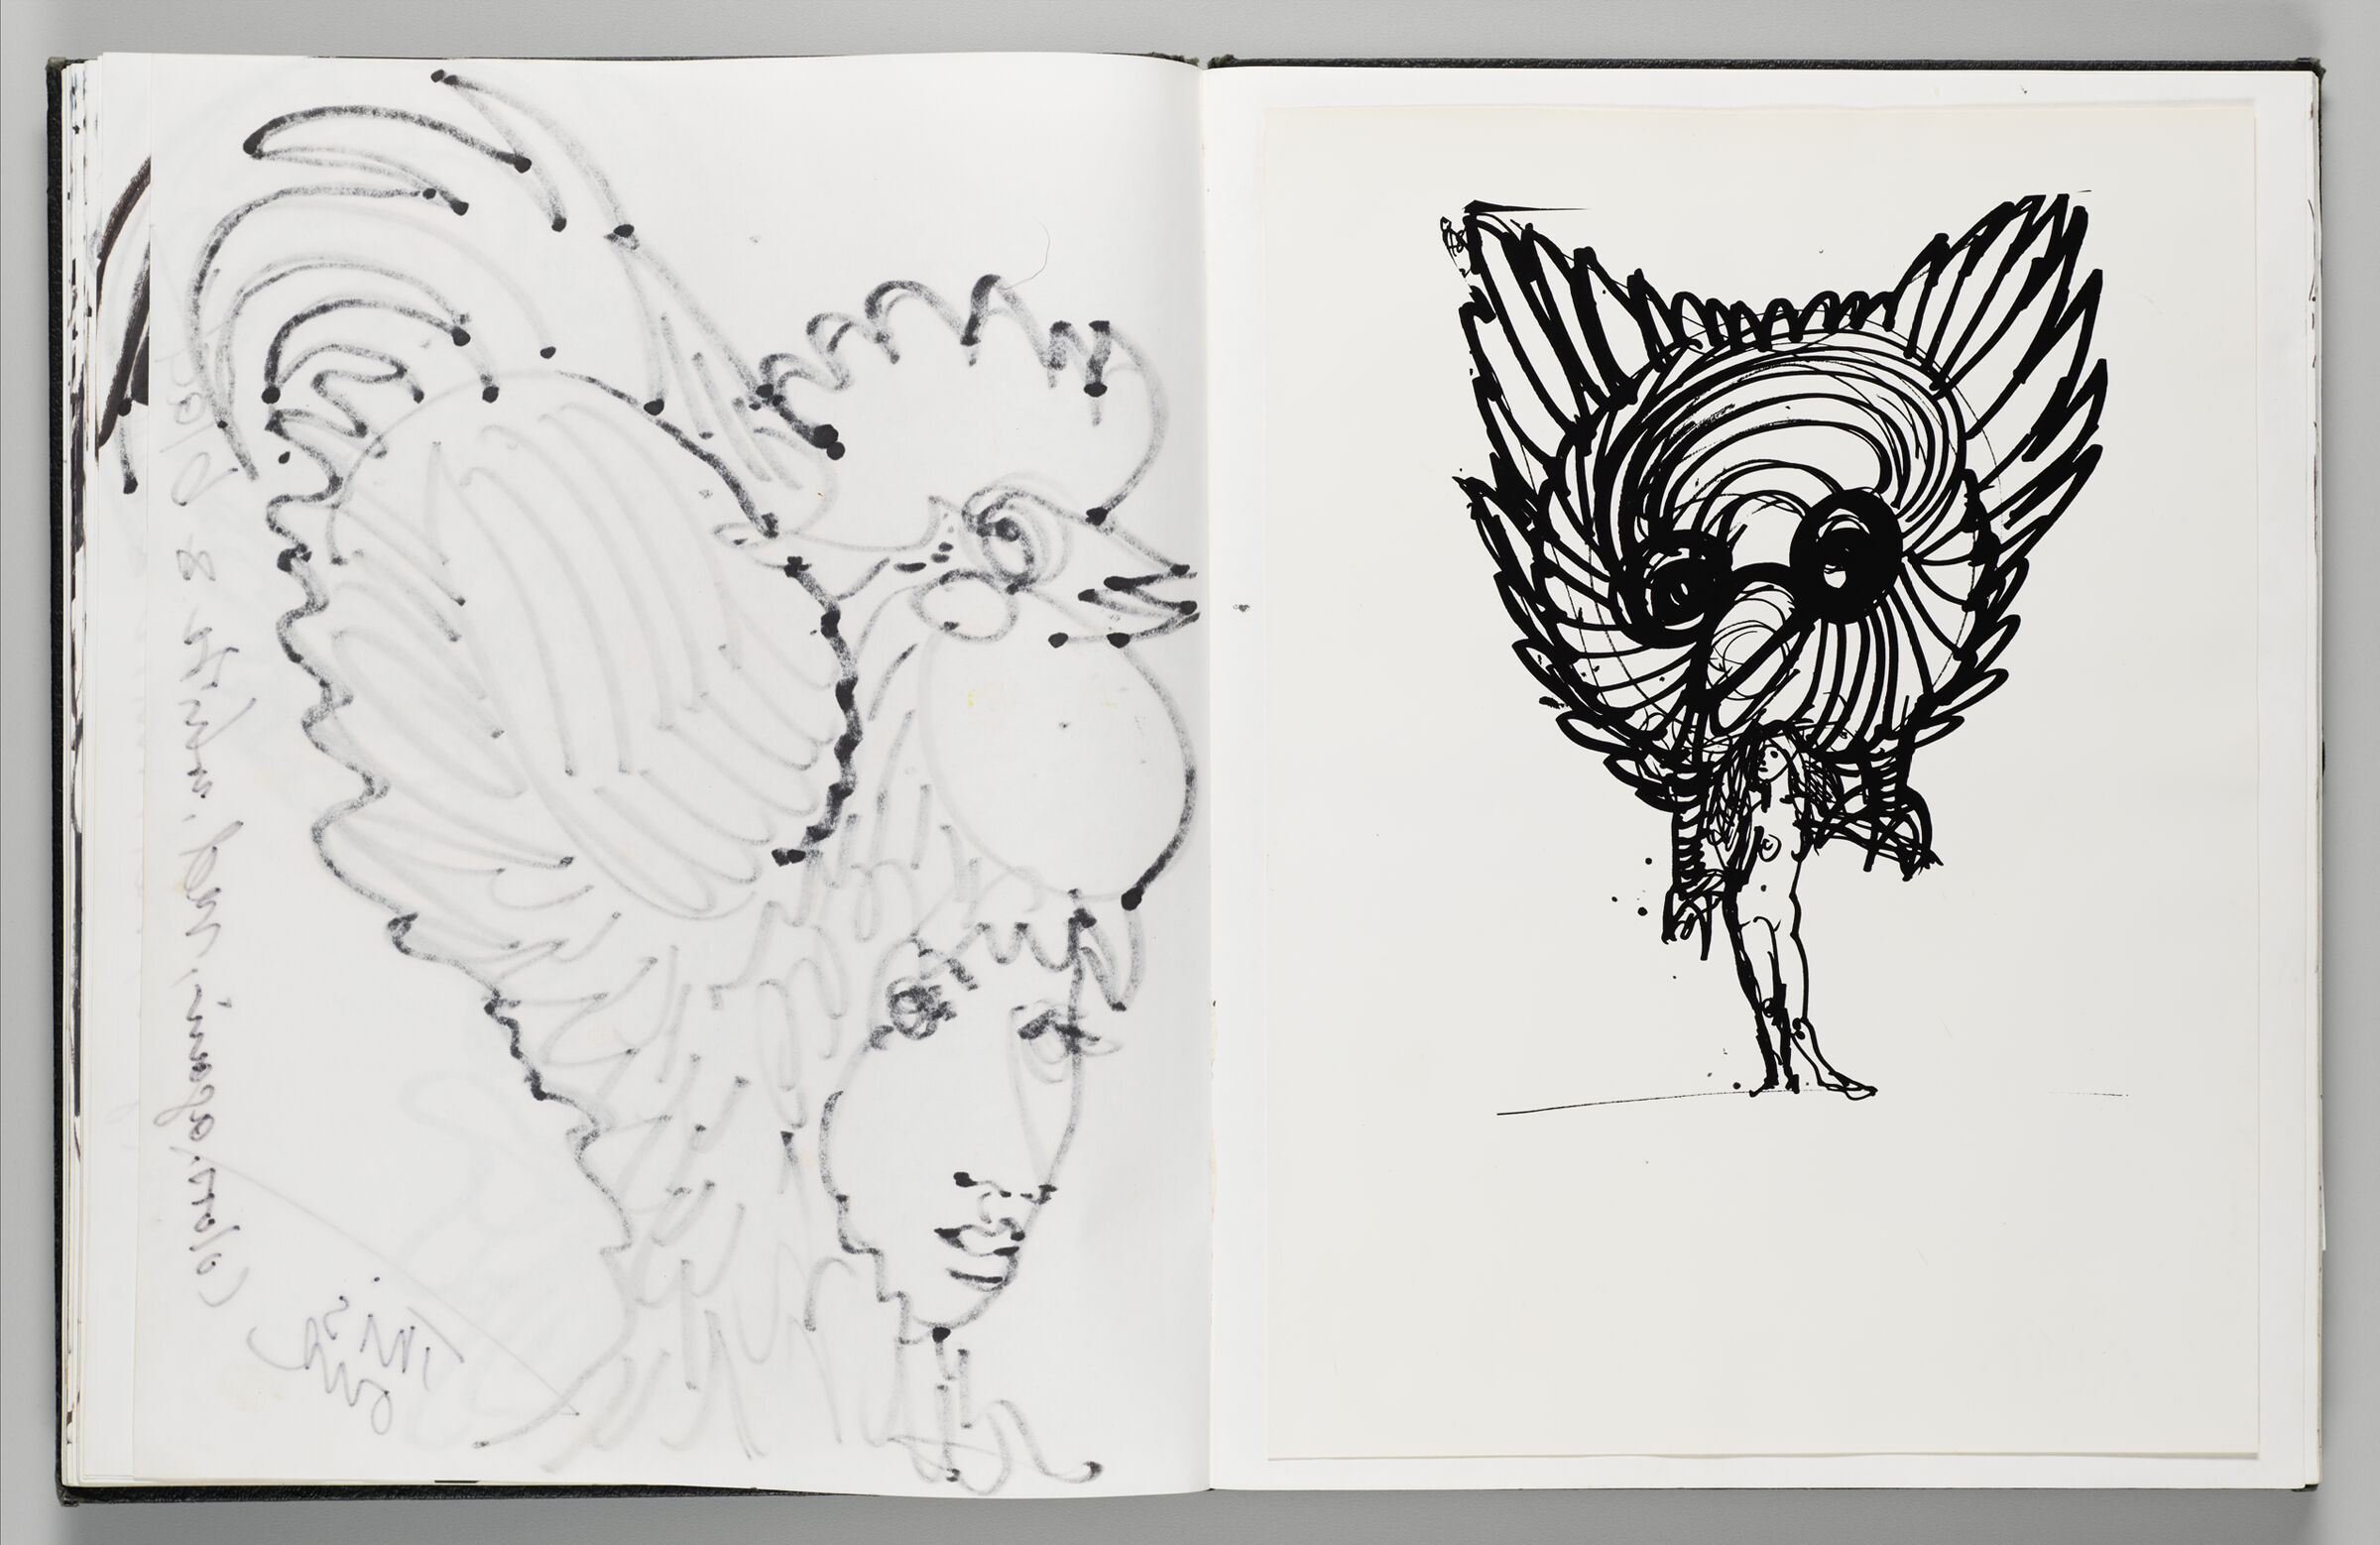 Untitled (Bleed-Through Of Previous Page, Left Page); Untitled (Pasted In Photograph Of Sparrow Headpiece, Right Page)